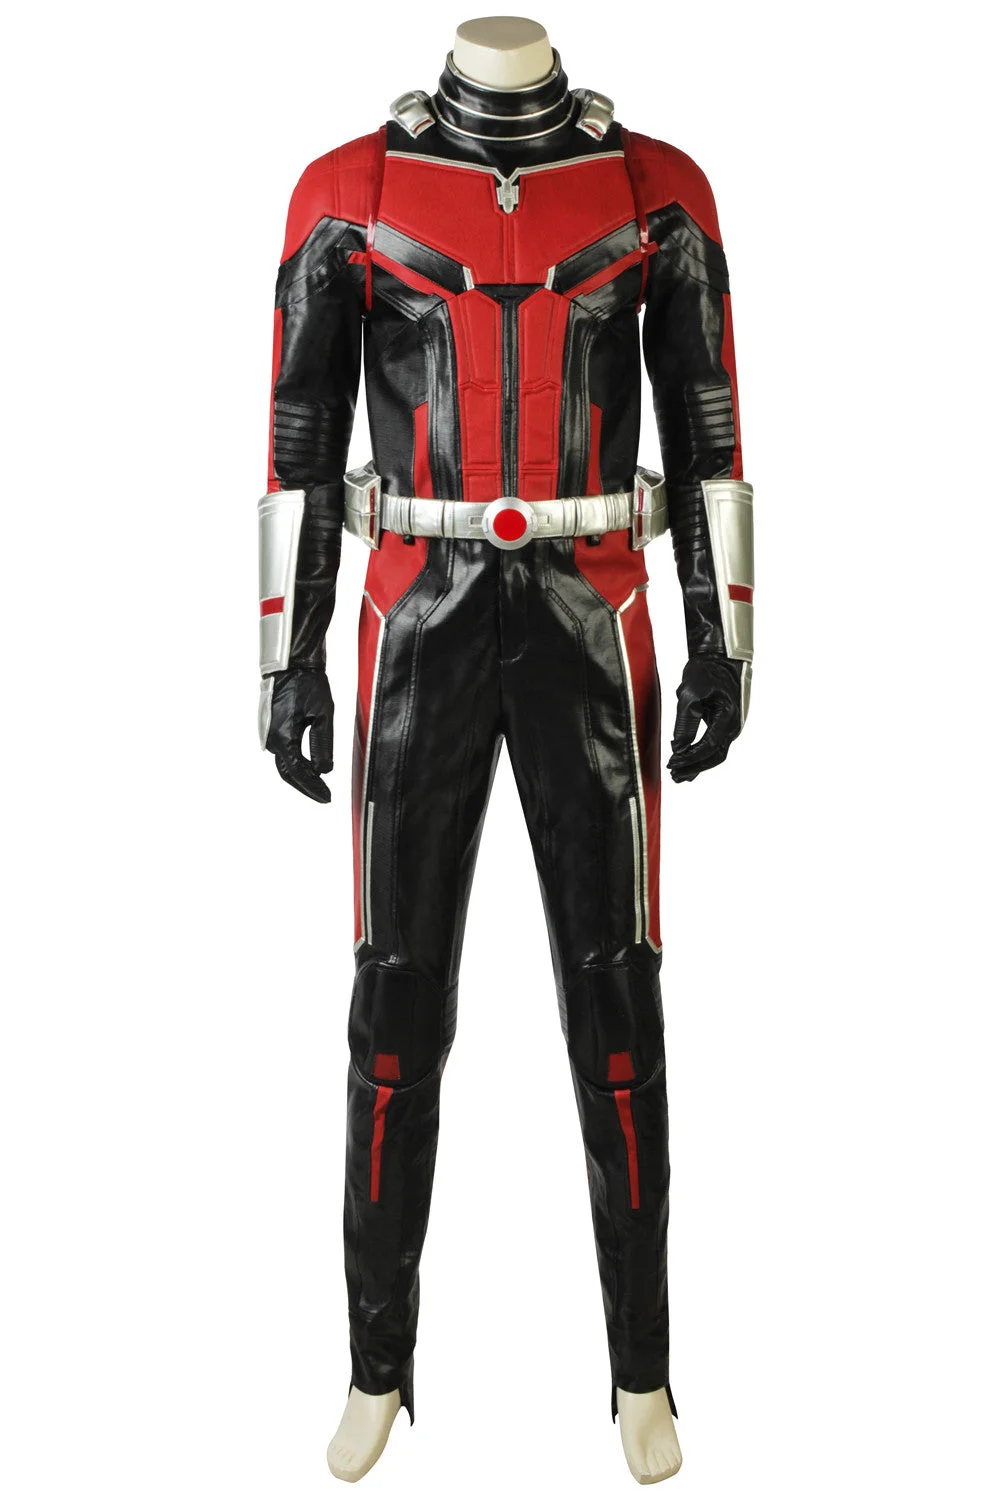 Ant-Man and the Wasp 2018 Ant Man Cosplay Costume Top Level